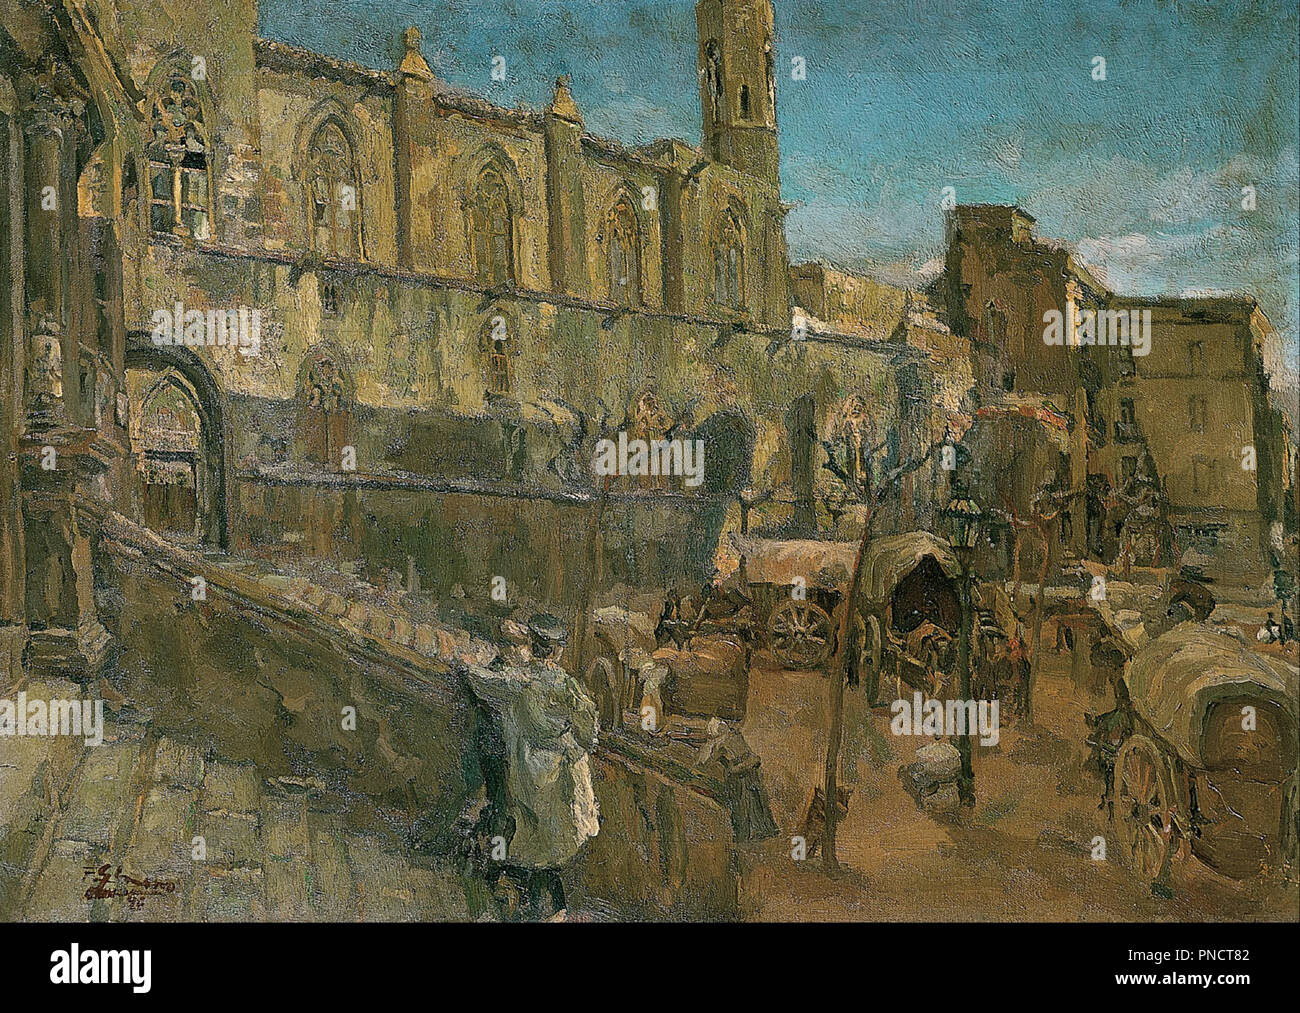 Plaza del Rey. Date/Period: 1896. Painting. Oil on canvas. Height: 500 mm (19.68 in); Width: 690 mm (27.16 in). Author: Francesc Gimeno. GIMENO, FRANCISCO. Stock Photo